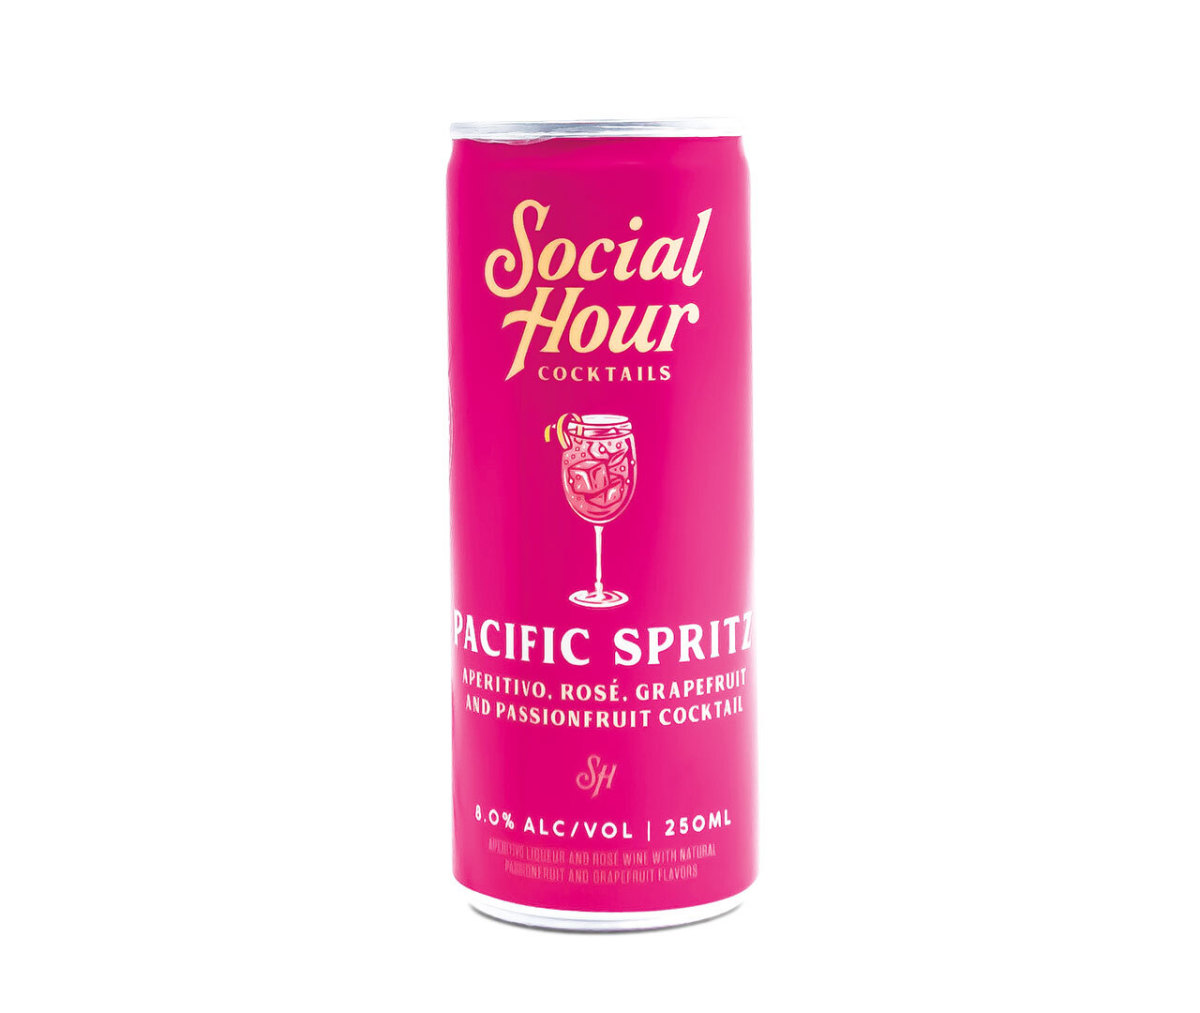 Pink can of Social Hour Cocktails Pacific Spritz 